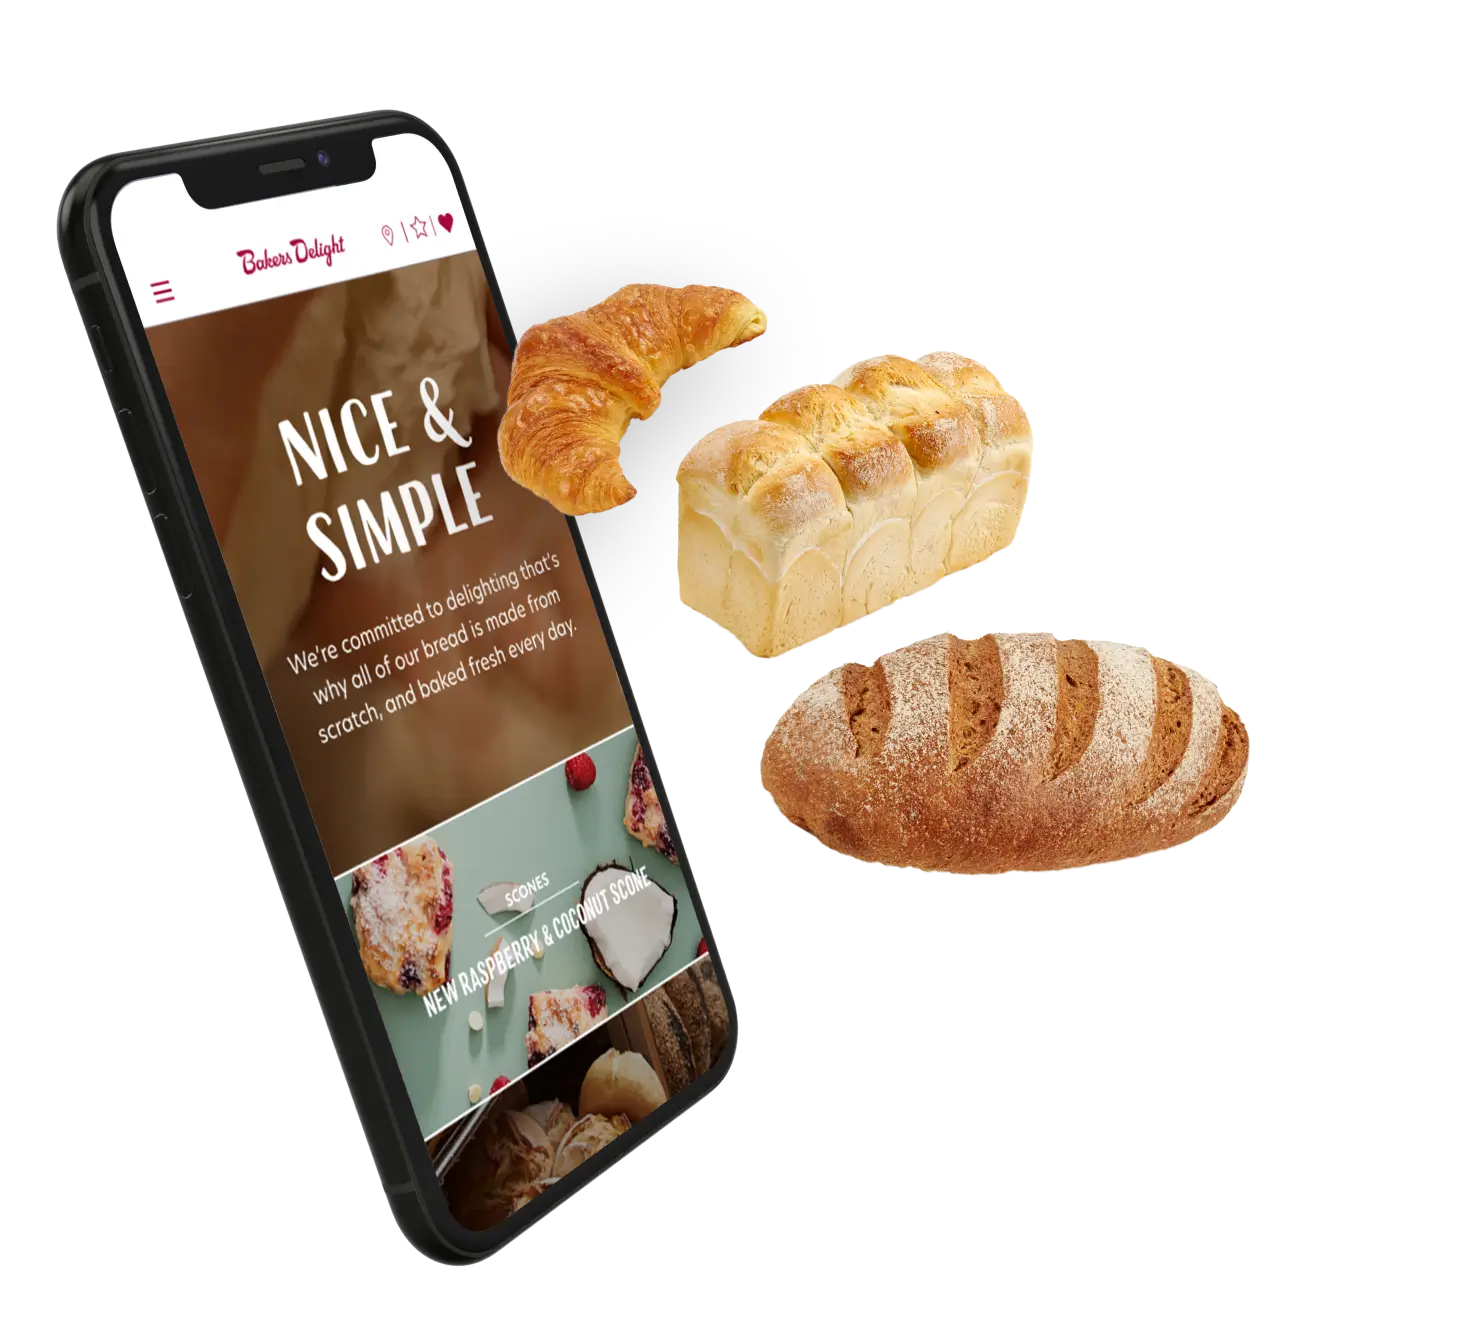 Bakers Delight Phone Mockup